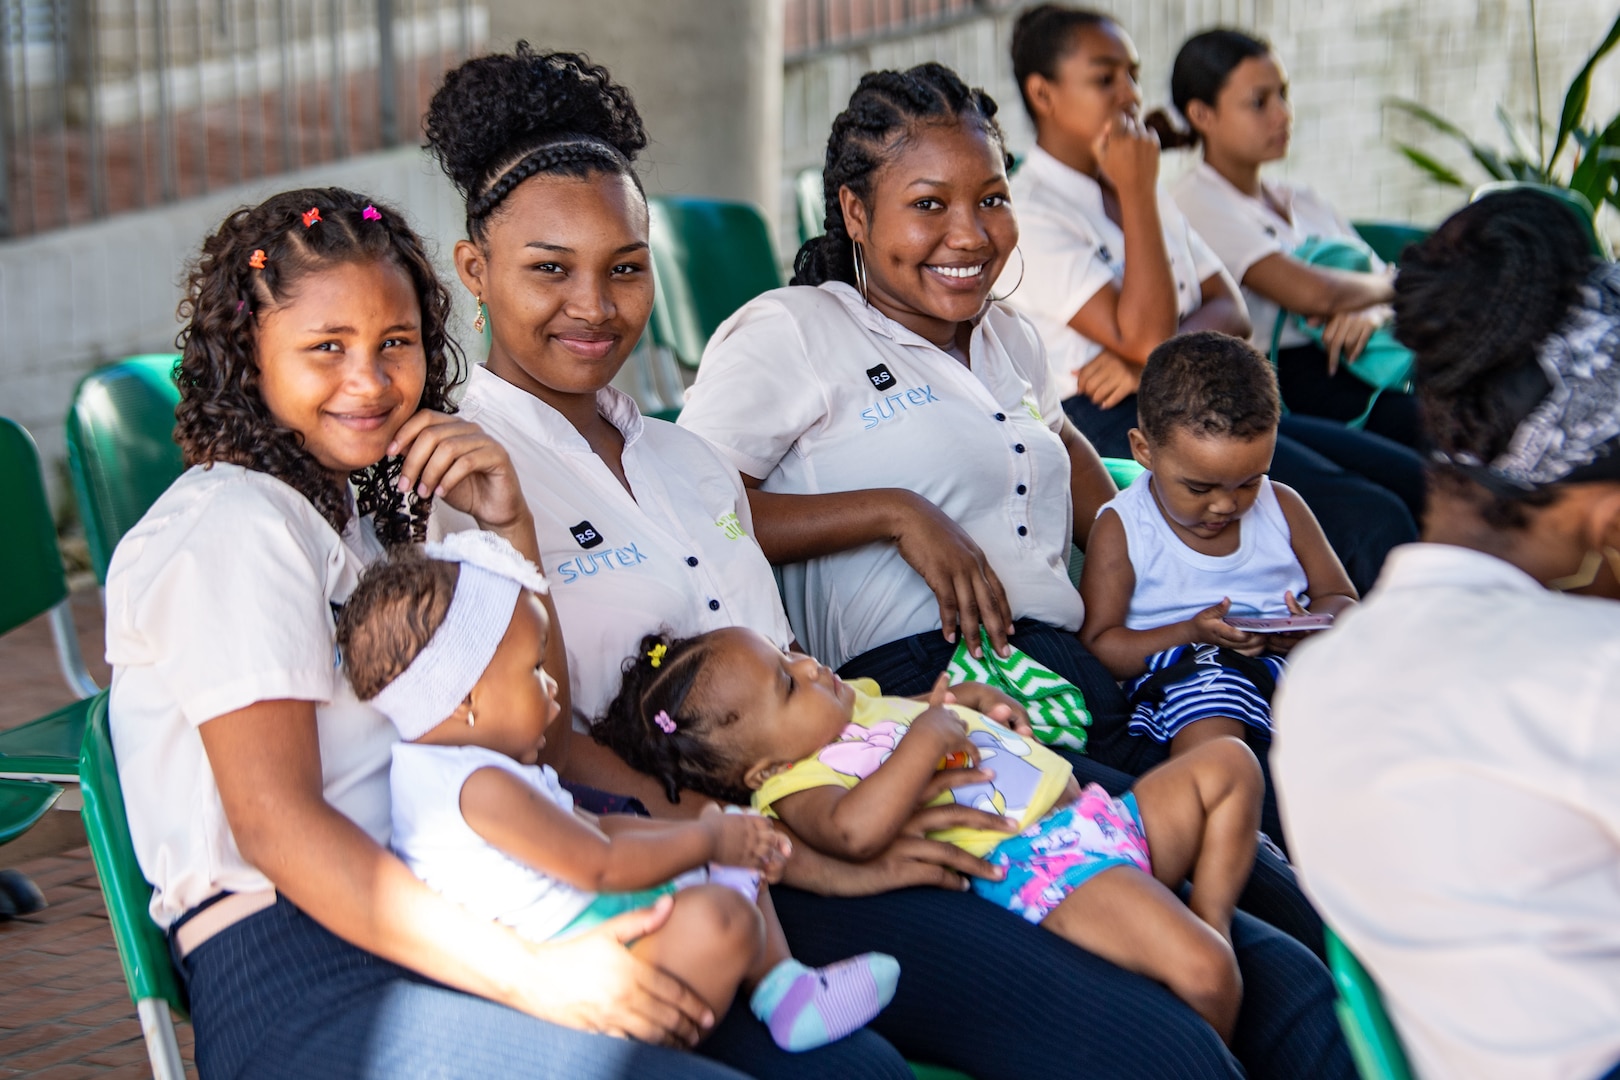 221115-N-LP924-1013 CARTAGENA, Colombia (Nov. 15, 2022) Young mothers and their children await medical care provided by the staff assigned to hospital ship USNS Comfort (T-AH 20) as part of Continuing Promise 2022 at Juan Fe in Cartagena, Colombia, Nov. 15, 2022. Comfort is deployed to U.S. 4th Fleet in support of Continuing Promise 2022, a humanitarian assistance and goodwill mission conducting direct medical care, expeditionary veterinary care, and subject matter expert exchanges with five partner nations in the Caribbean, Central and South America. (U.S. Navy photo by Mass Communication Specialist 3rd Class Sophia Simons)